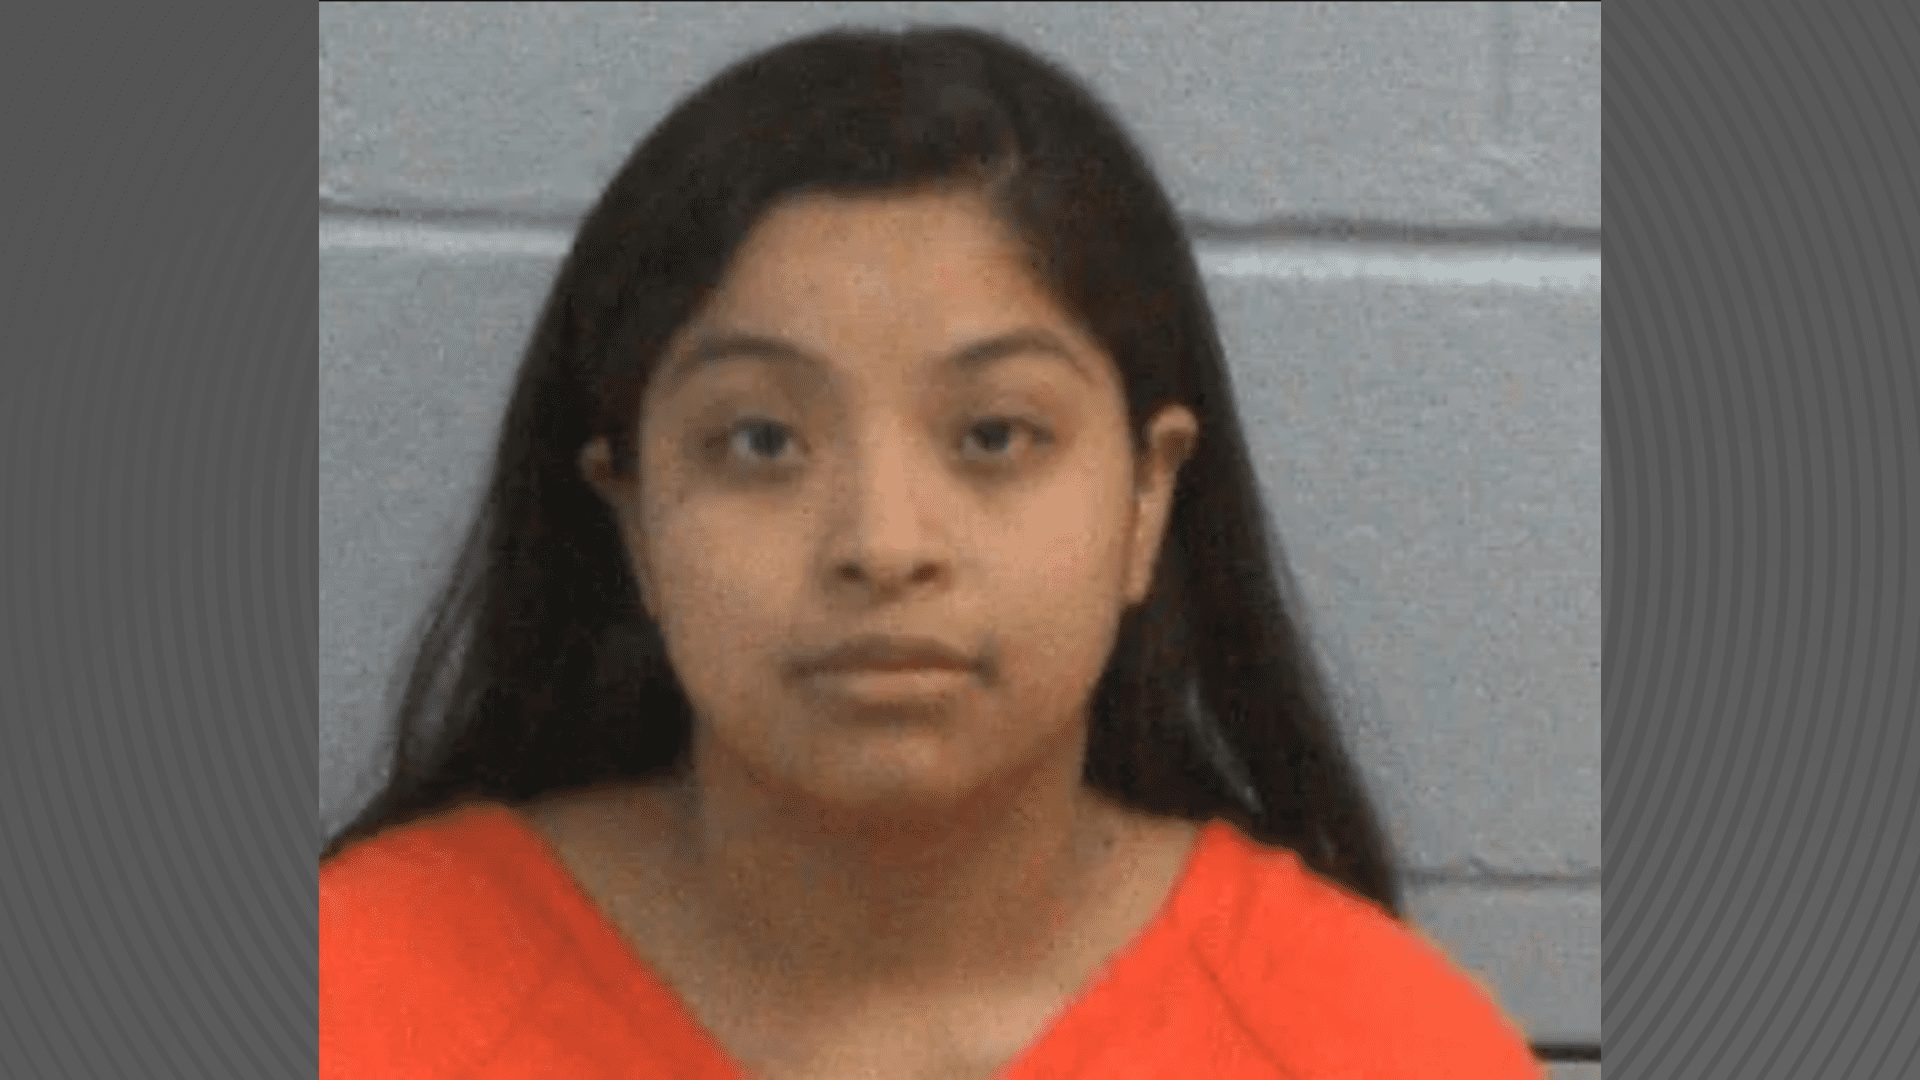 Texas Woman Arrested for Alleged Child Endangerment